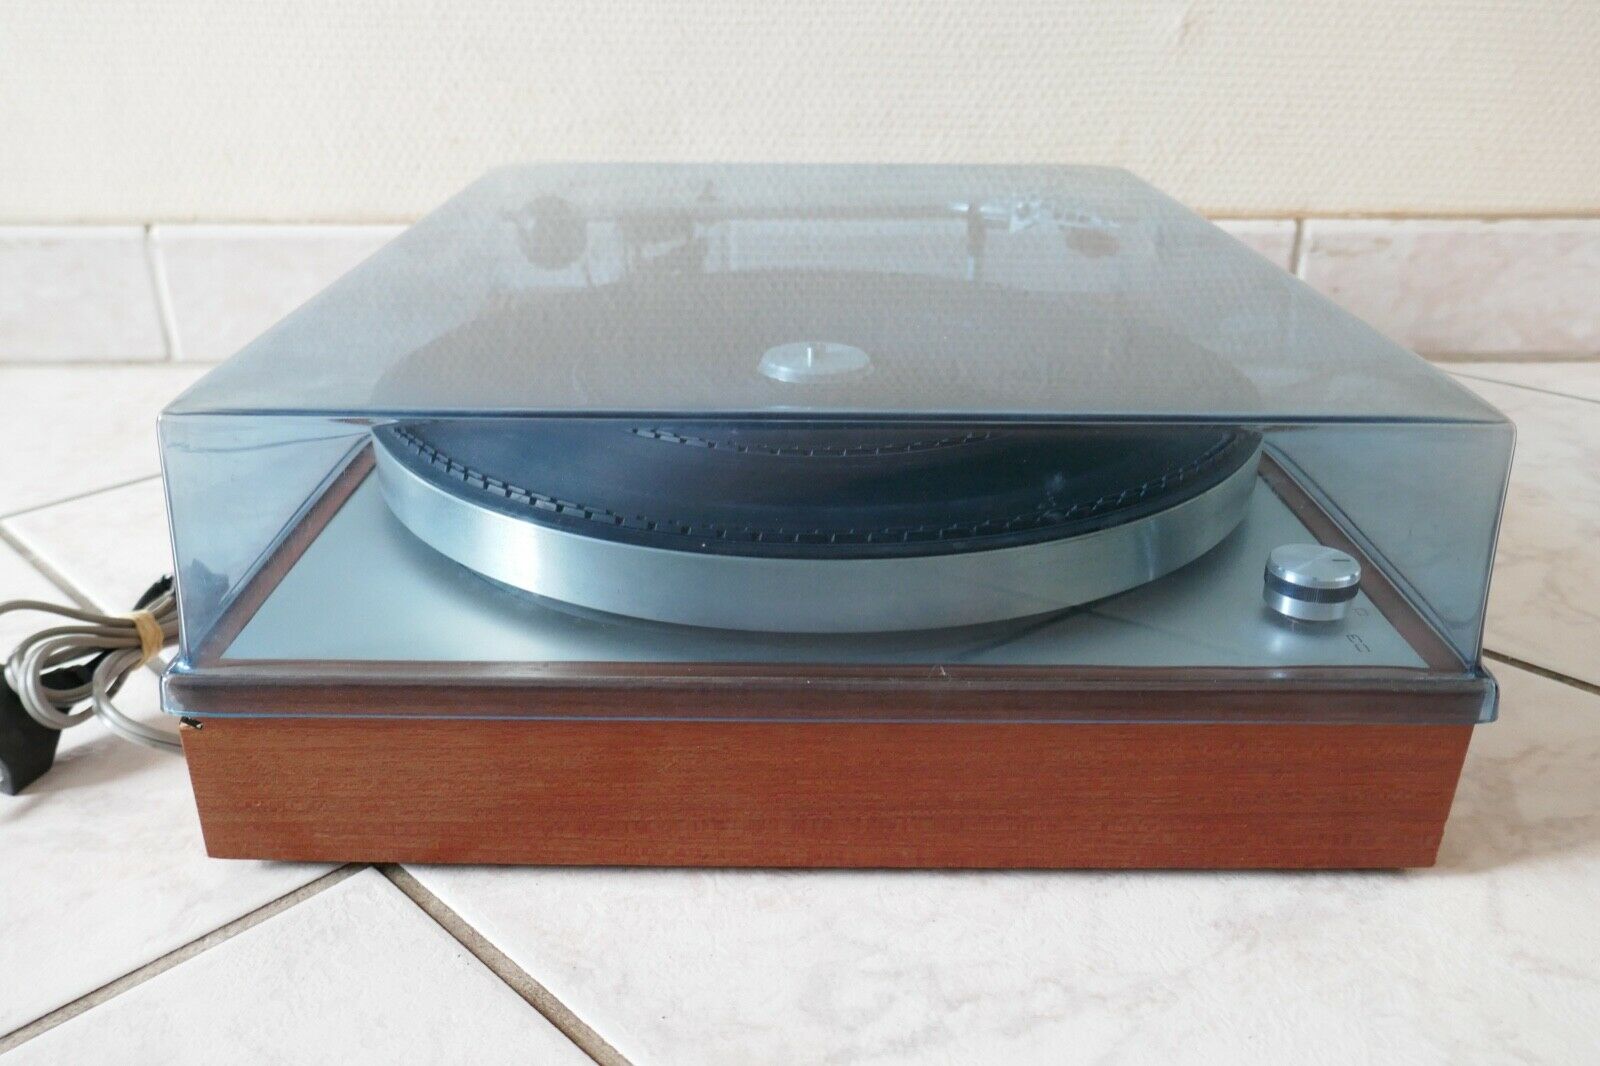 Cellule + pointe de lecture Analogis Thorens TD150MKII - Platine to